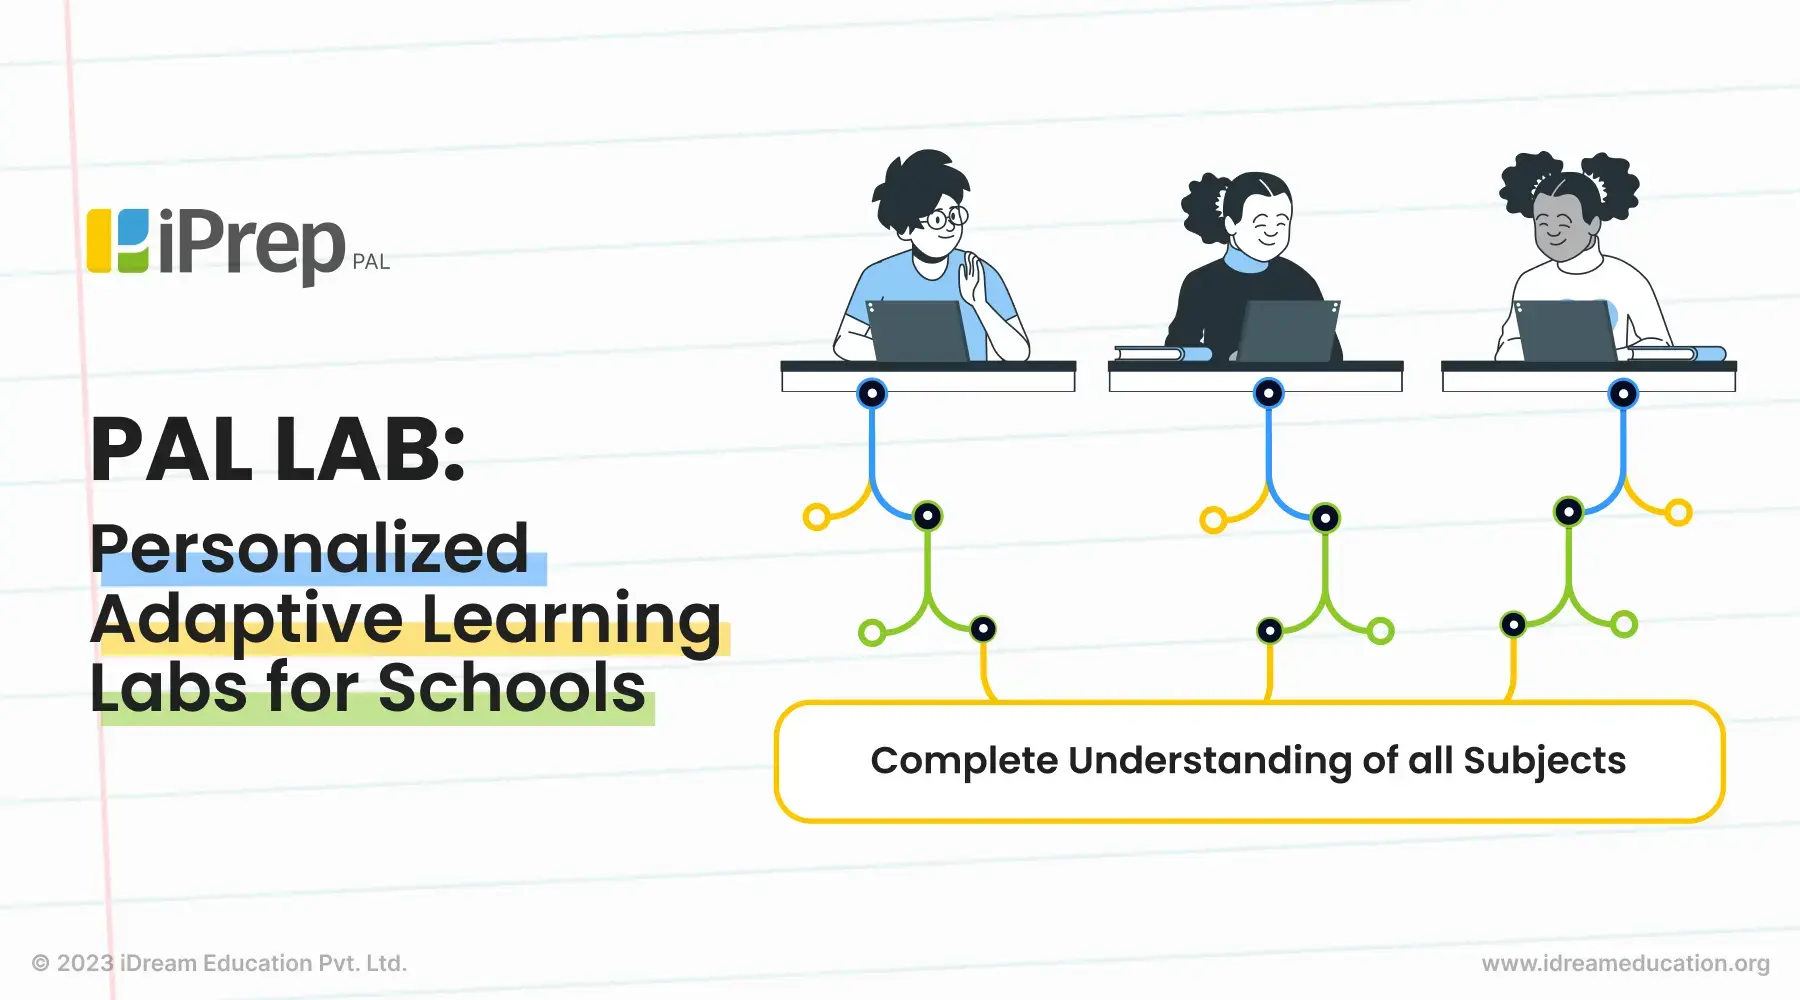 A visual representation of PAL LAB - Personalized Adaptive Learning Labs for schools